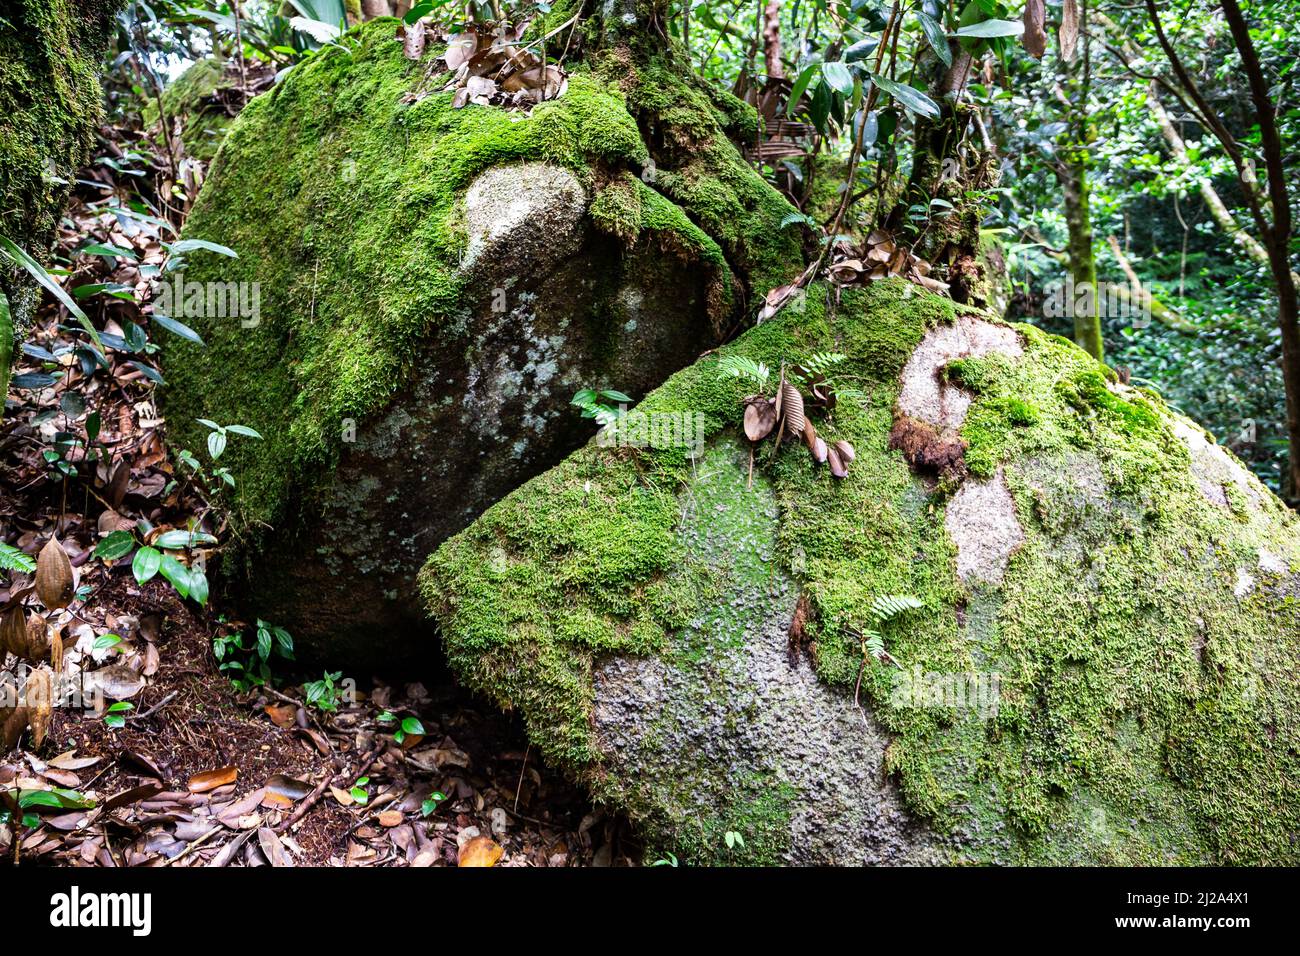 Stone overgrown with moss and lichen, covered with dry leaves in tropical rainforest in Morne Seychelles National Park on Mahe Island. Stock Photo